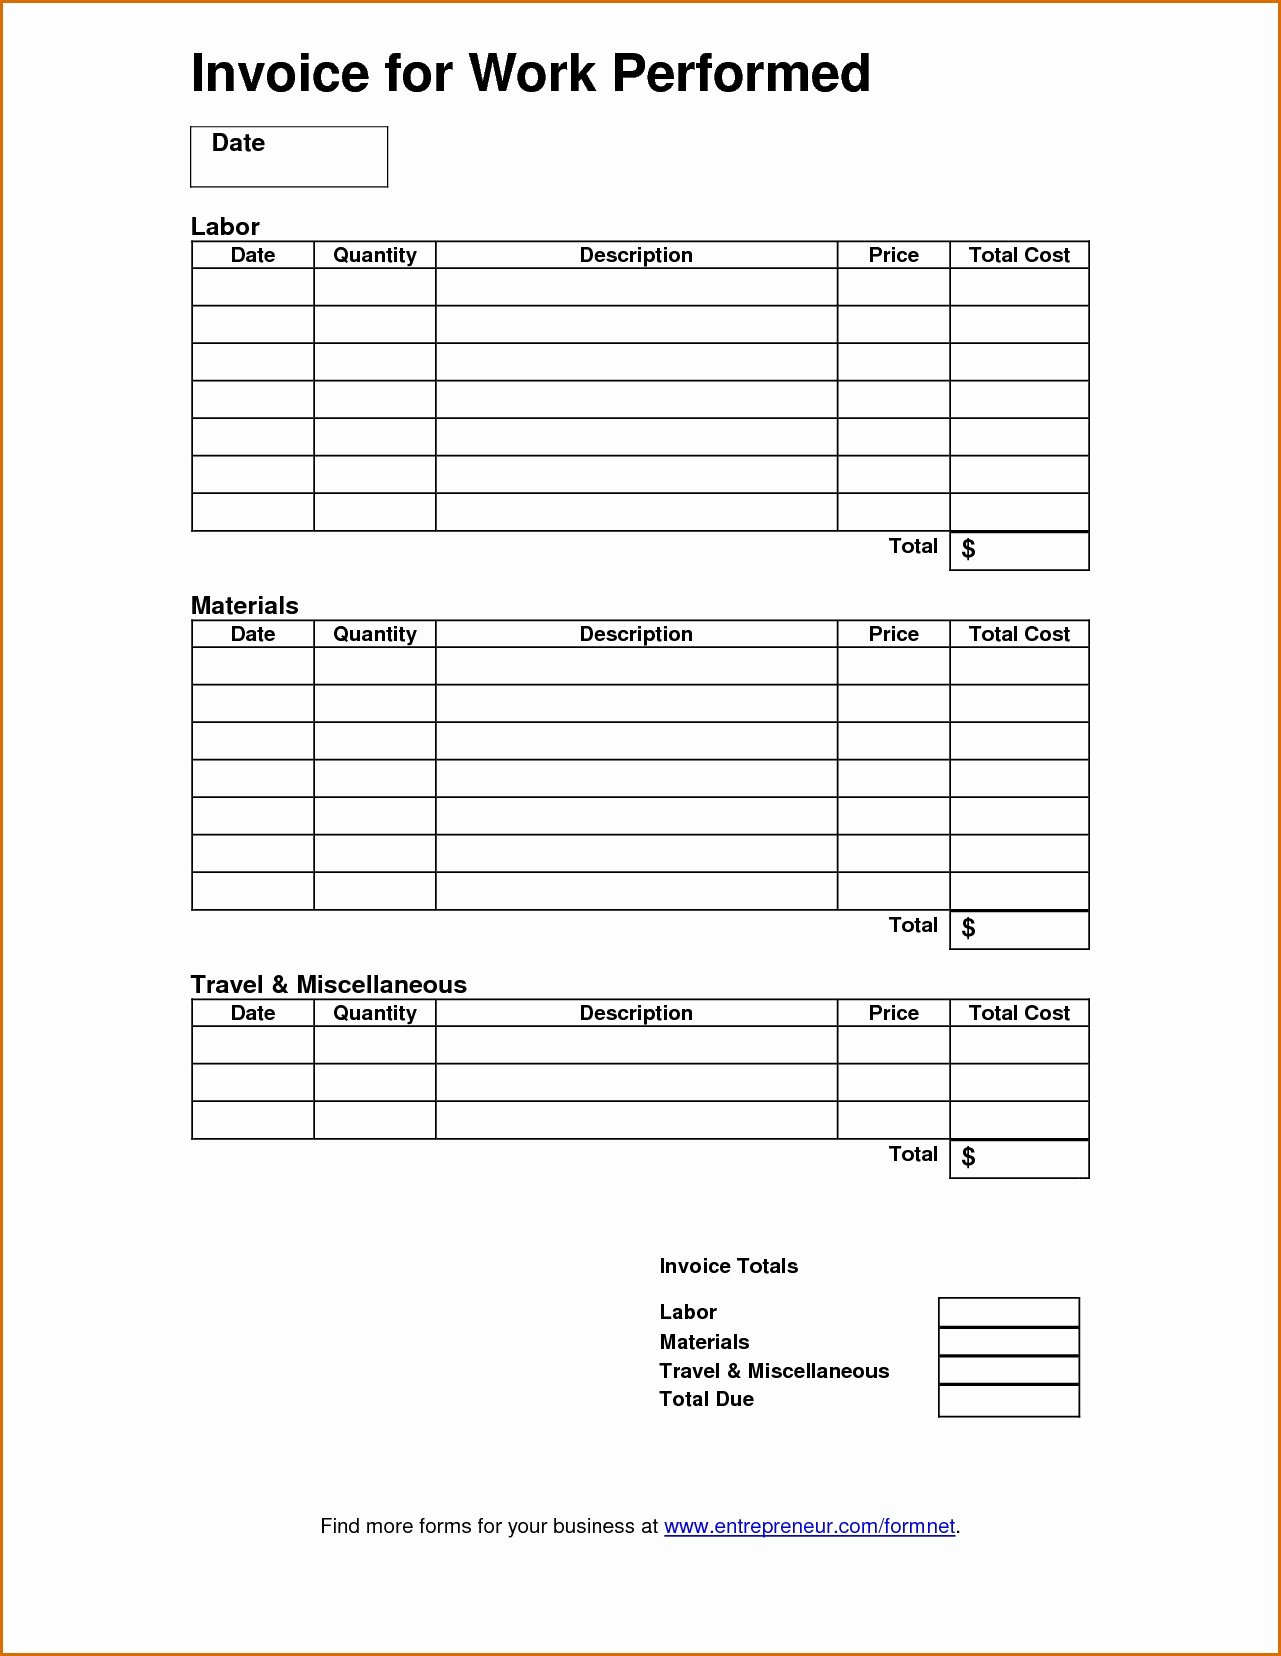 Work Completed form Template New Invoice for Work Invoice Template Ideas